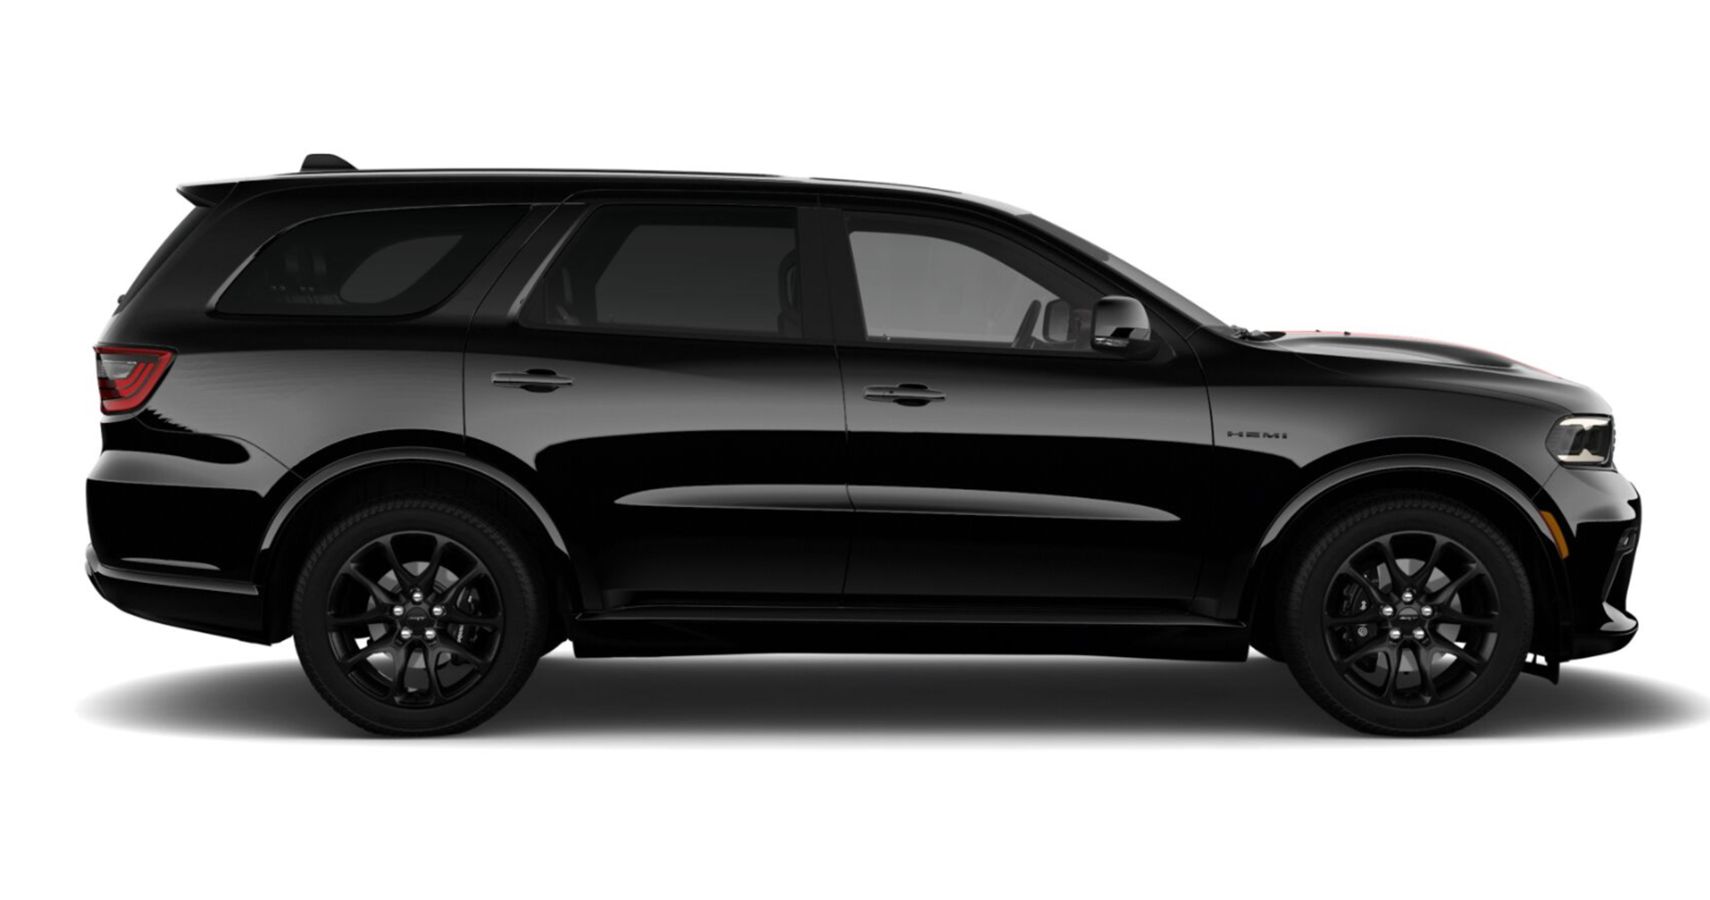 Why We Can’t Wait For The 2022 Dodge Durango R/T Plus